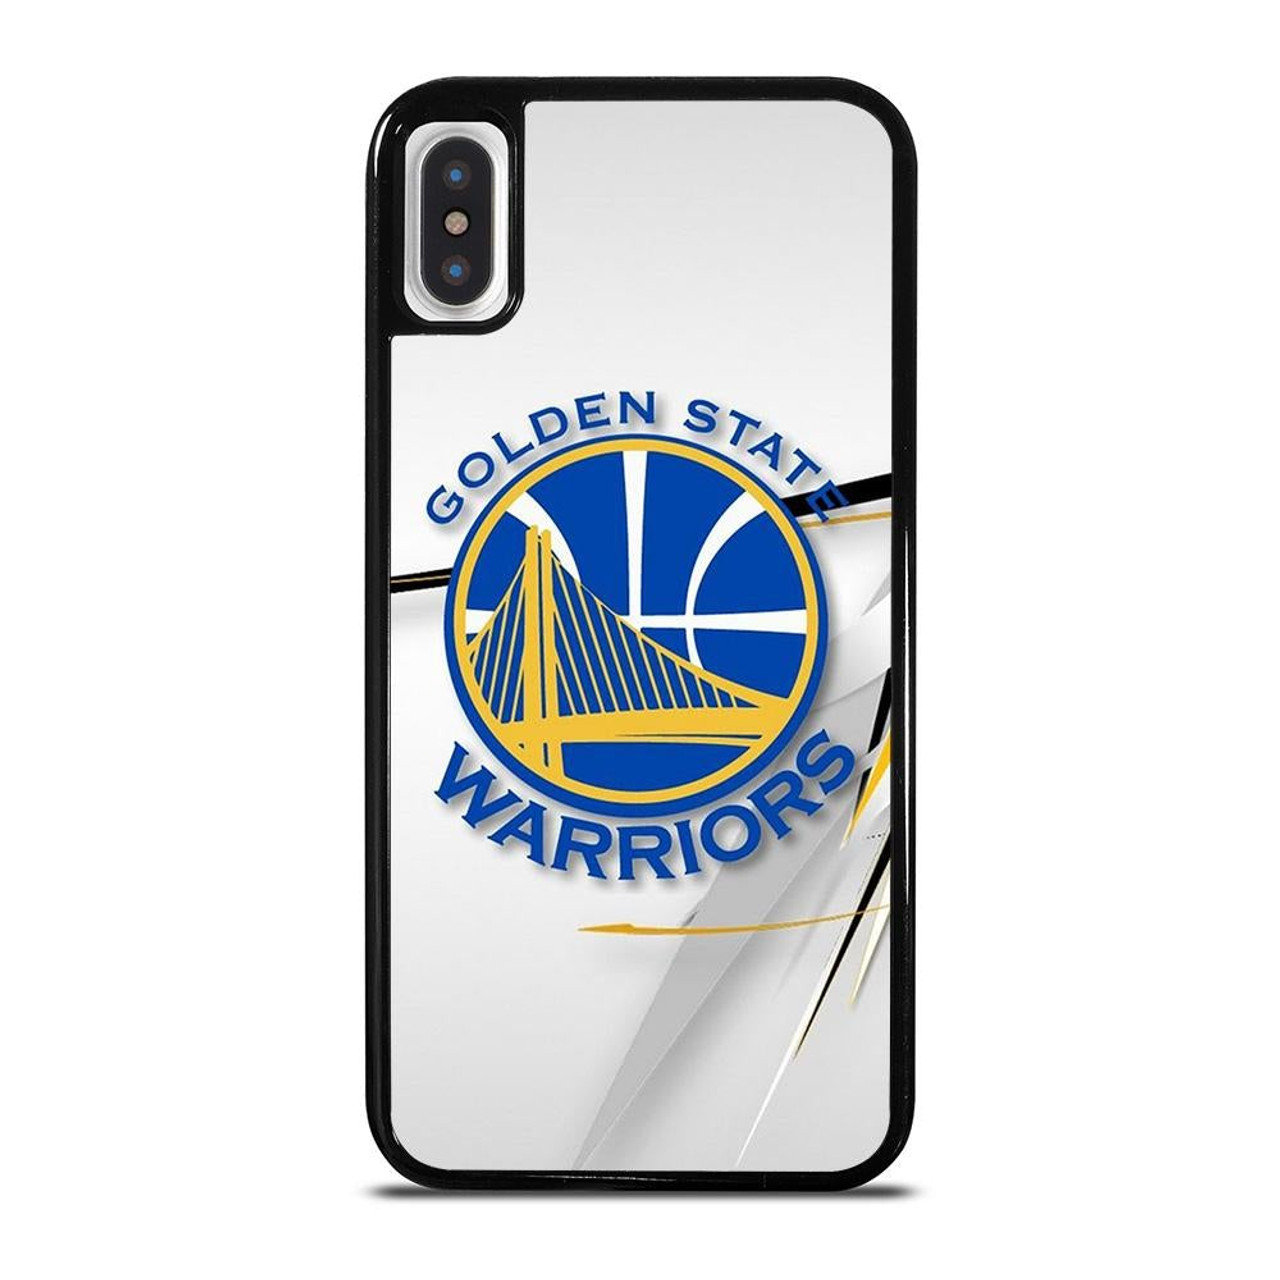 GOLDEN STATE WARRIORS BASKETBALL NBA iPhone X / XS Case Cover